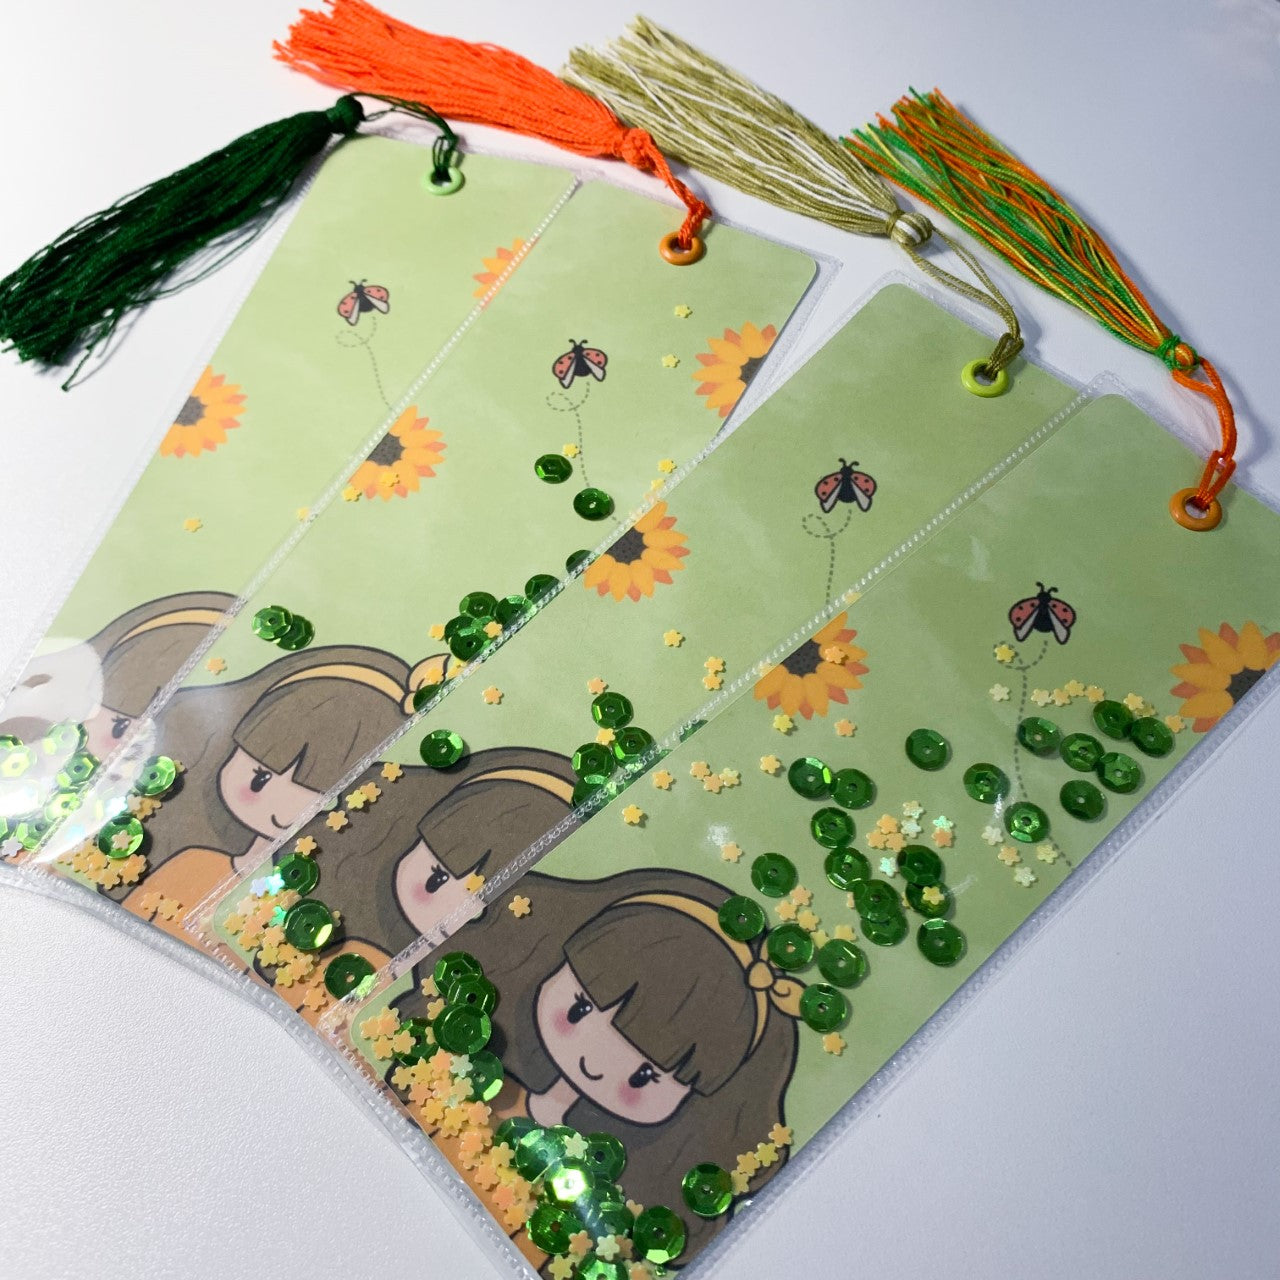 Sunflower Fields shaker bookmark - with sequins and tassel